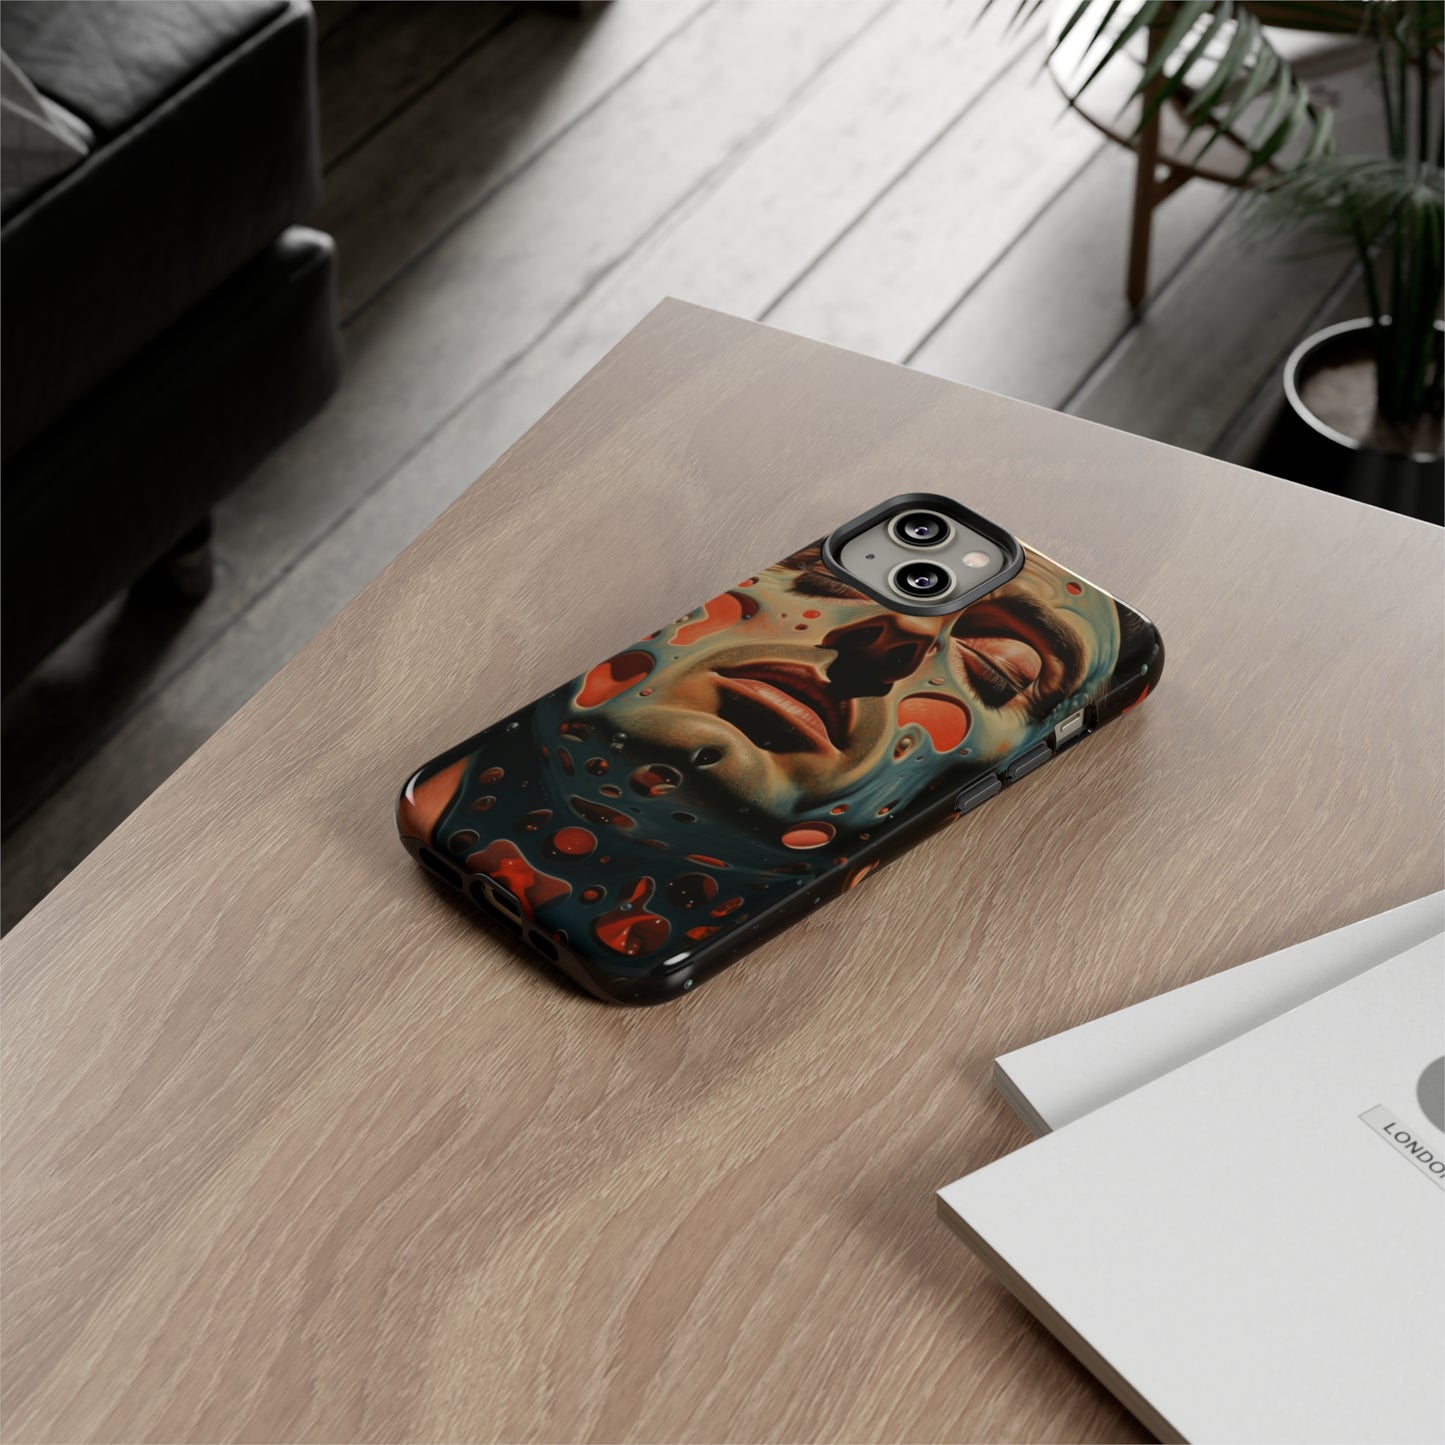 Starry Gaze: Glossy Dual-Layer Surrealism Design Protective Case for iPhone, Samsung, Google Pixel